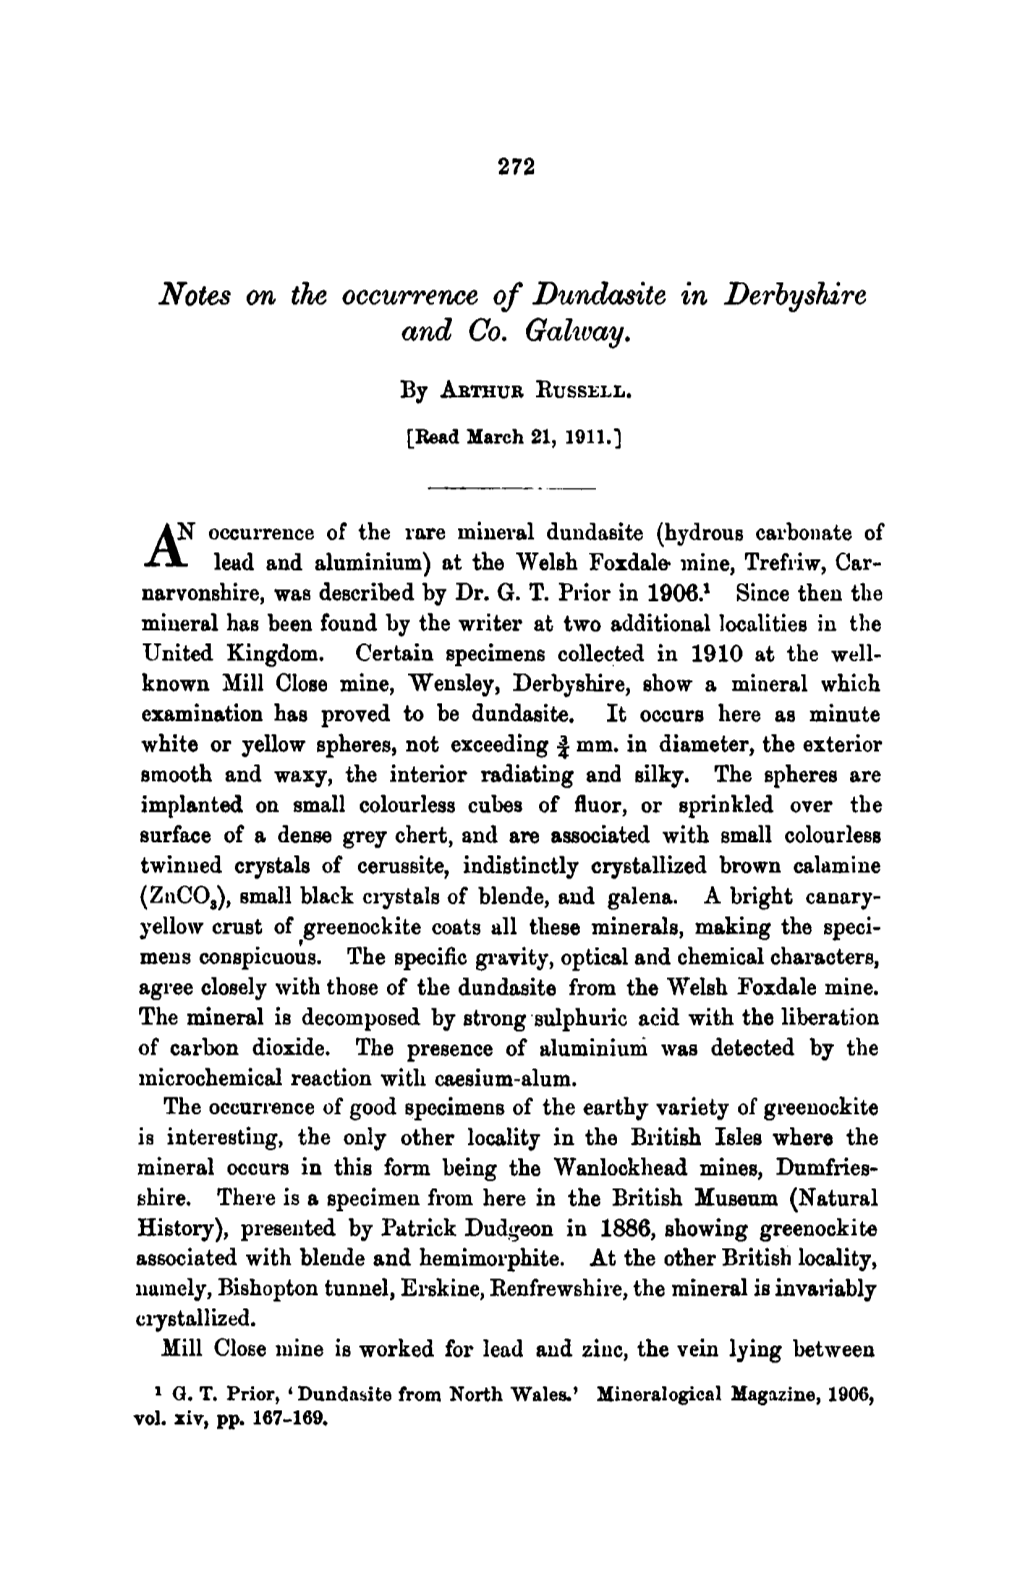 Notes on the Occurrence of Dundasite in Derbyshire and Co. Galway